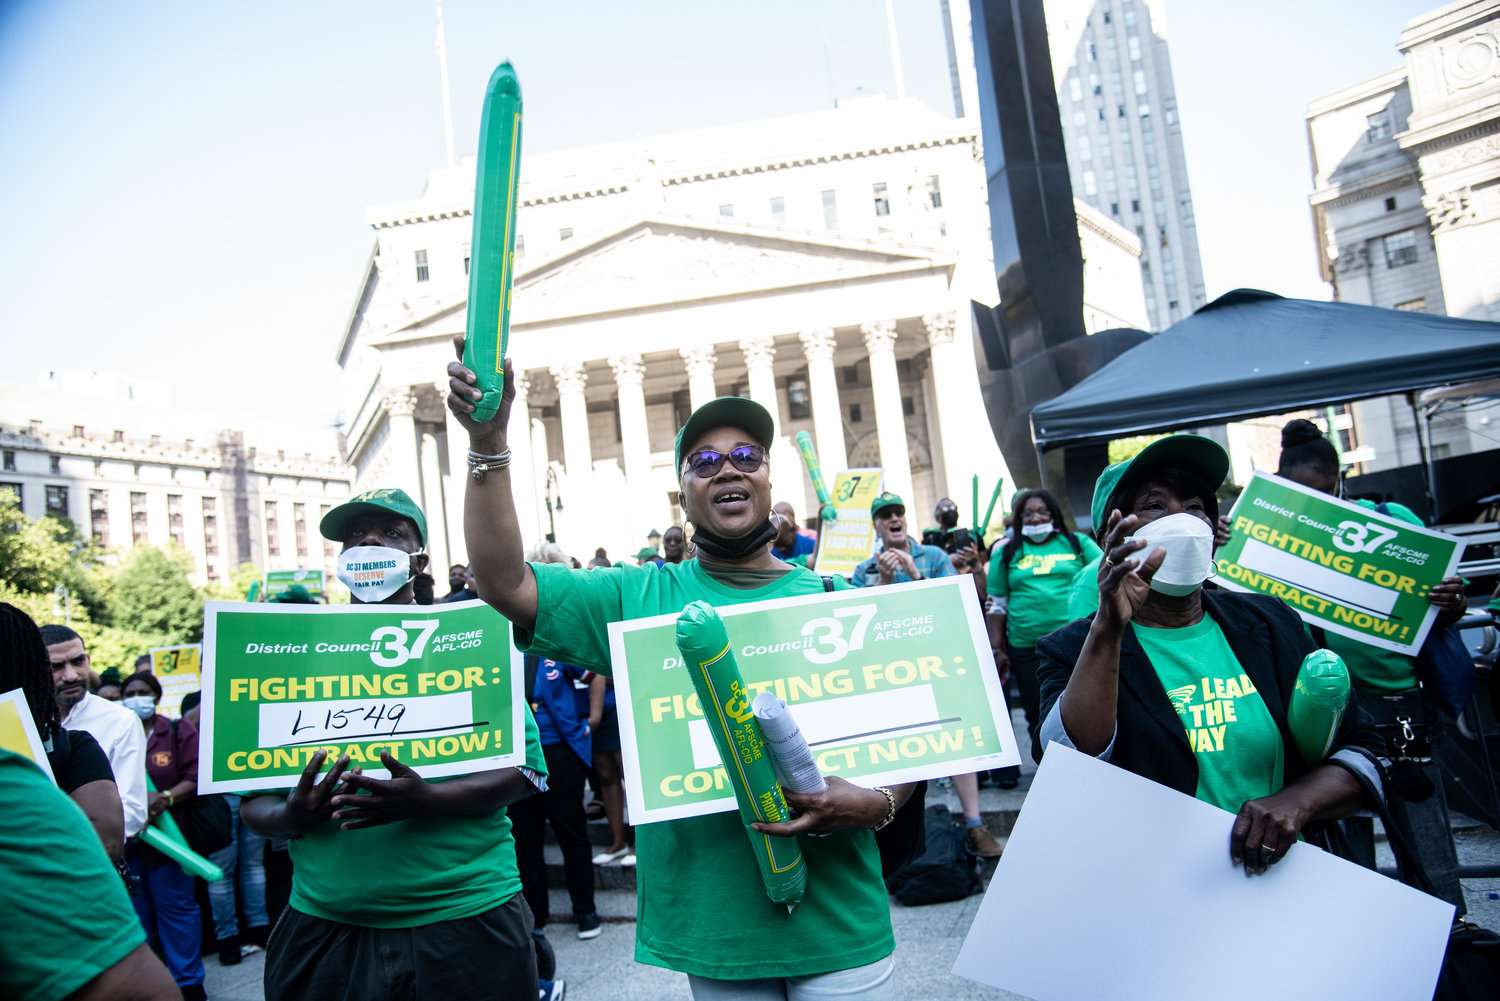 Workers represented by District Council 37 attended a June 15 rally at Foley Square as the union looks to start negotiations on a new contract. Its last agreement, covering nearly 100,000 city employees, expired more than a year ago.